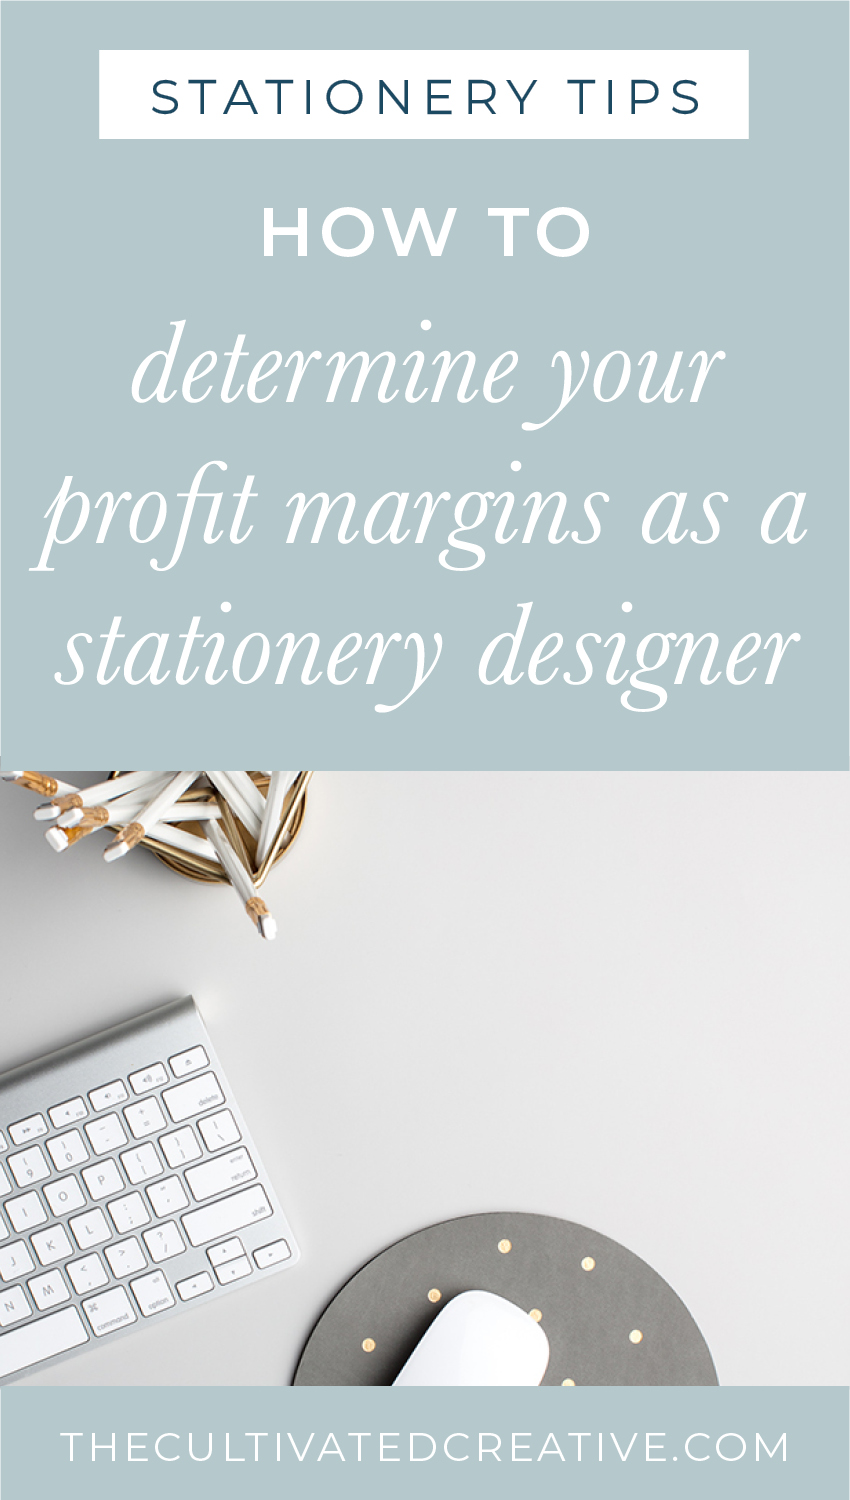 How to determine your profit margins as a stationery designer